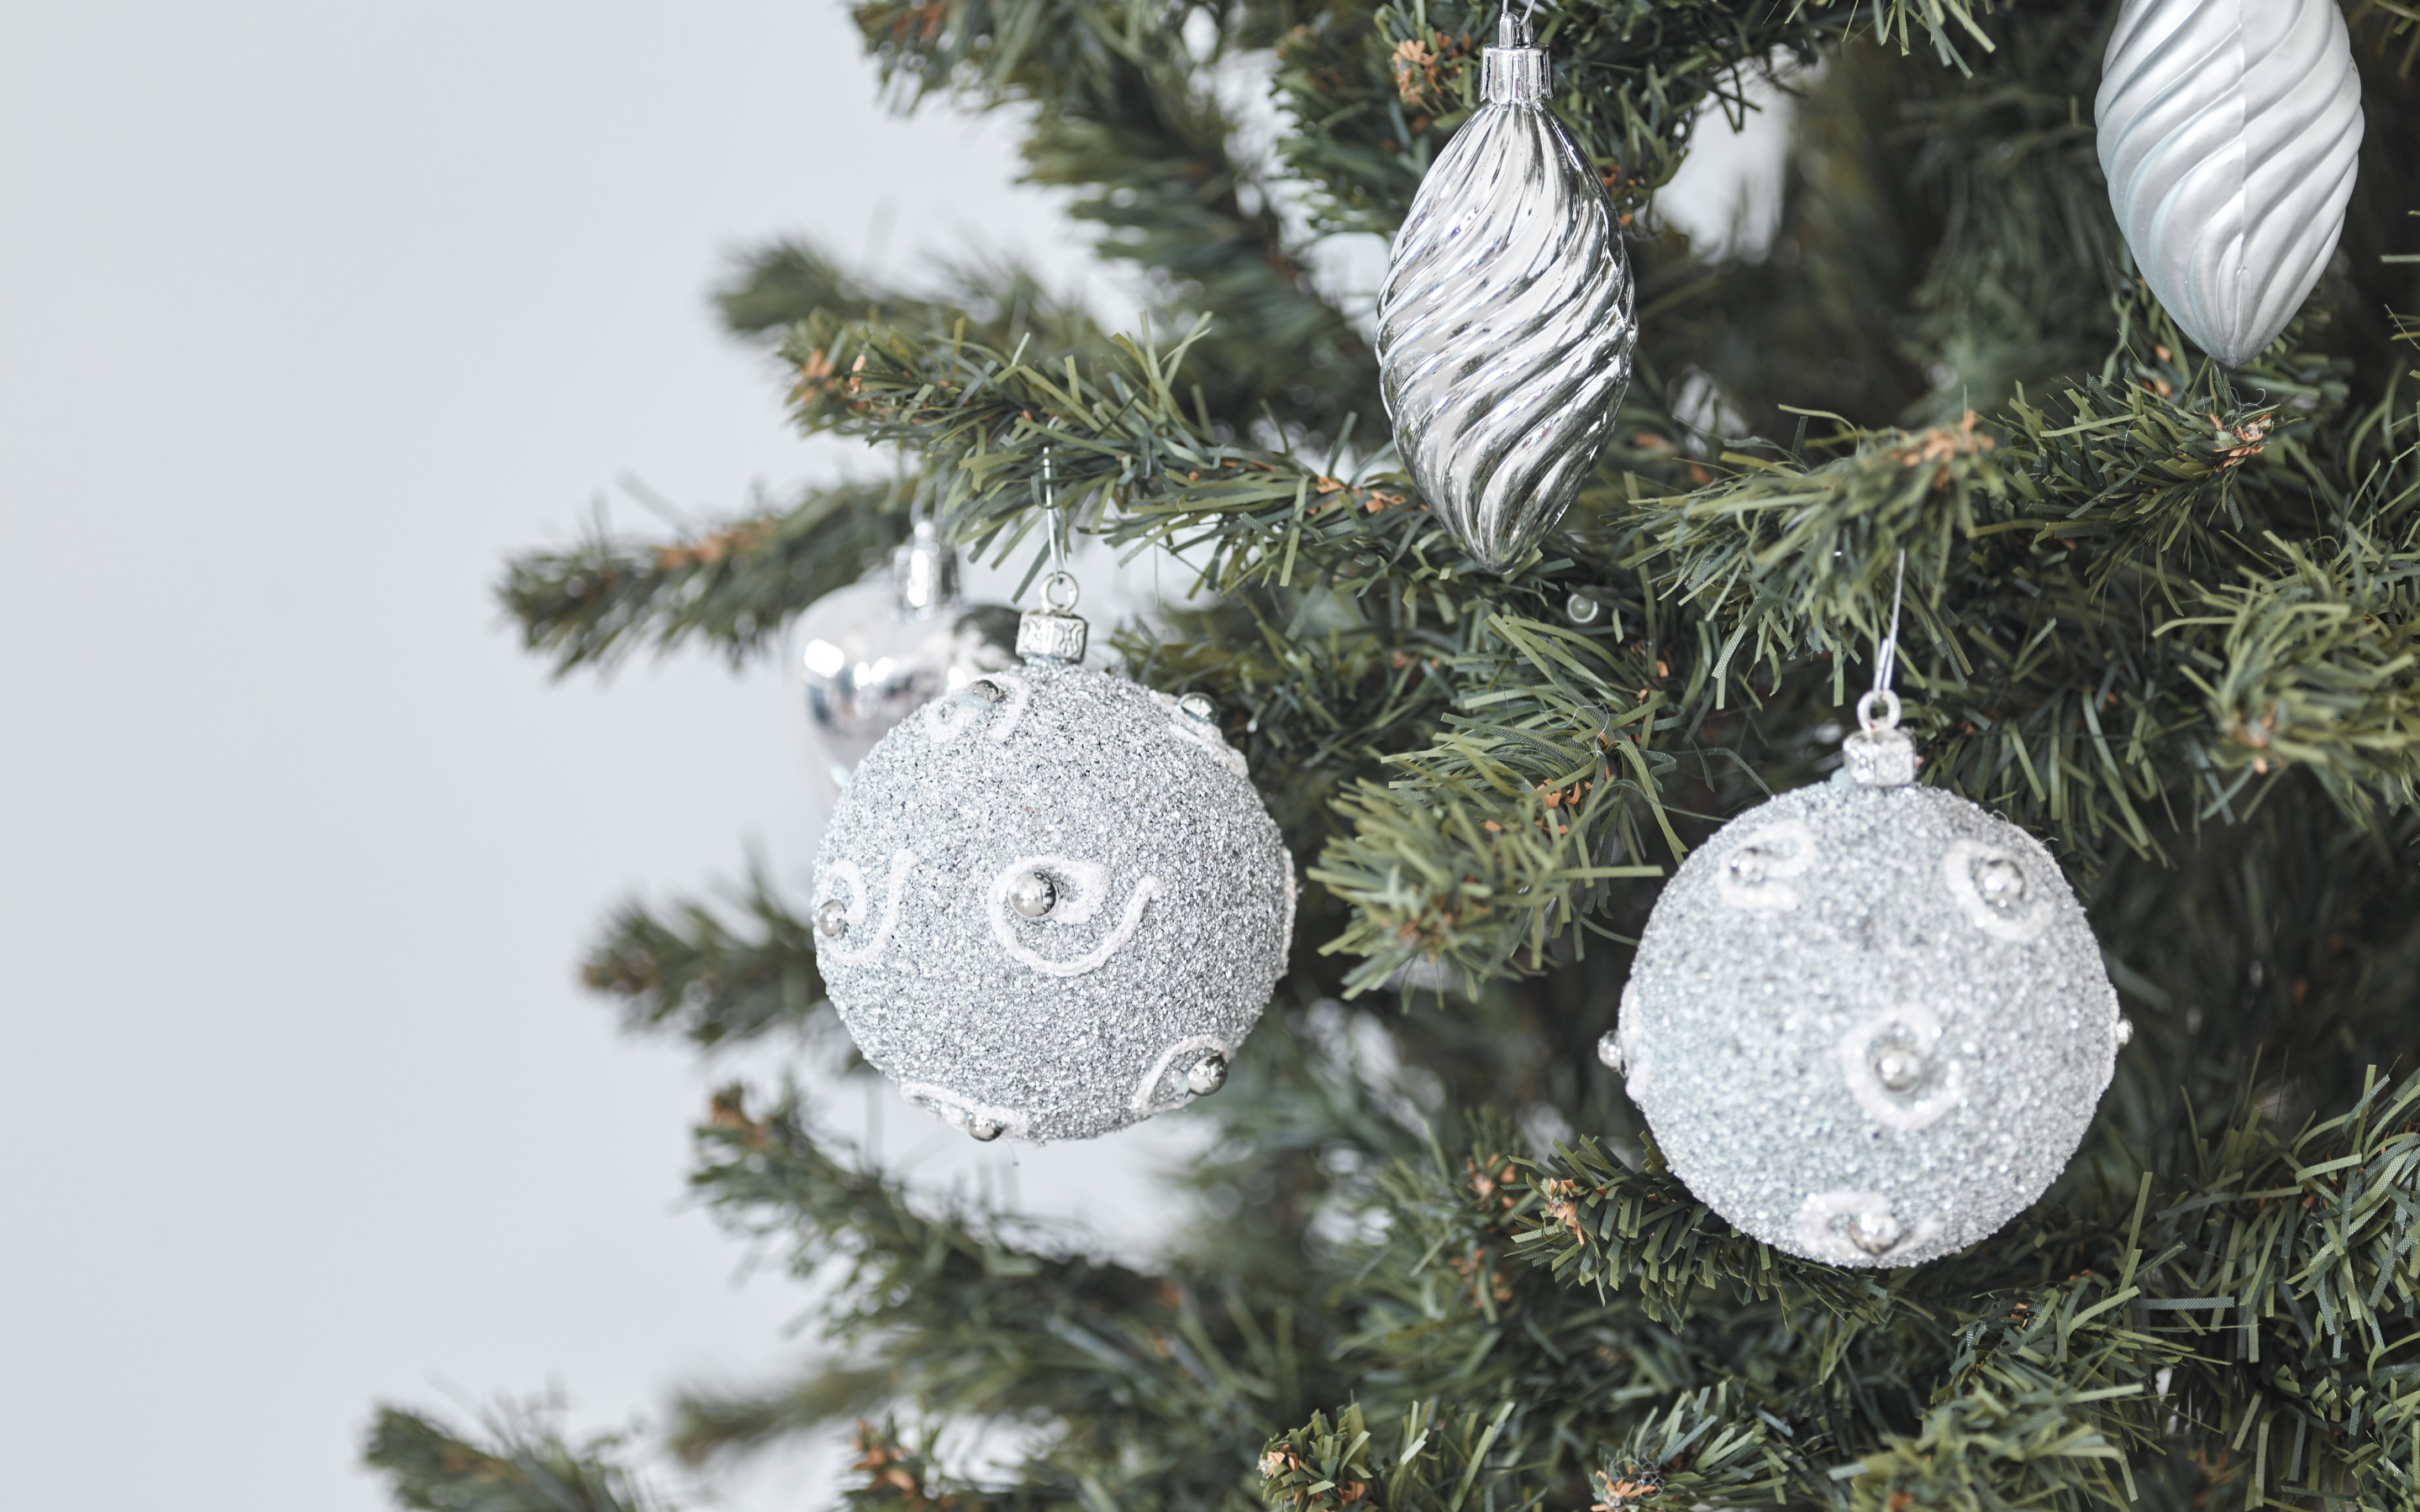 Download wallpaper Silver Christmas balls, tree, New Year, gray background, blur, silver Christmas background, Happy New Year, Christmas for desktop with resolution 2880x1800. High Quality HD picture wallpaper